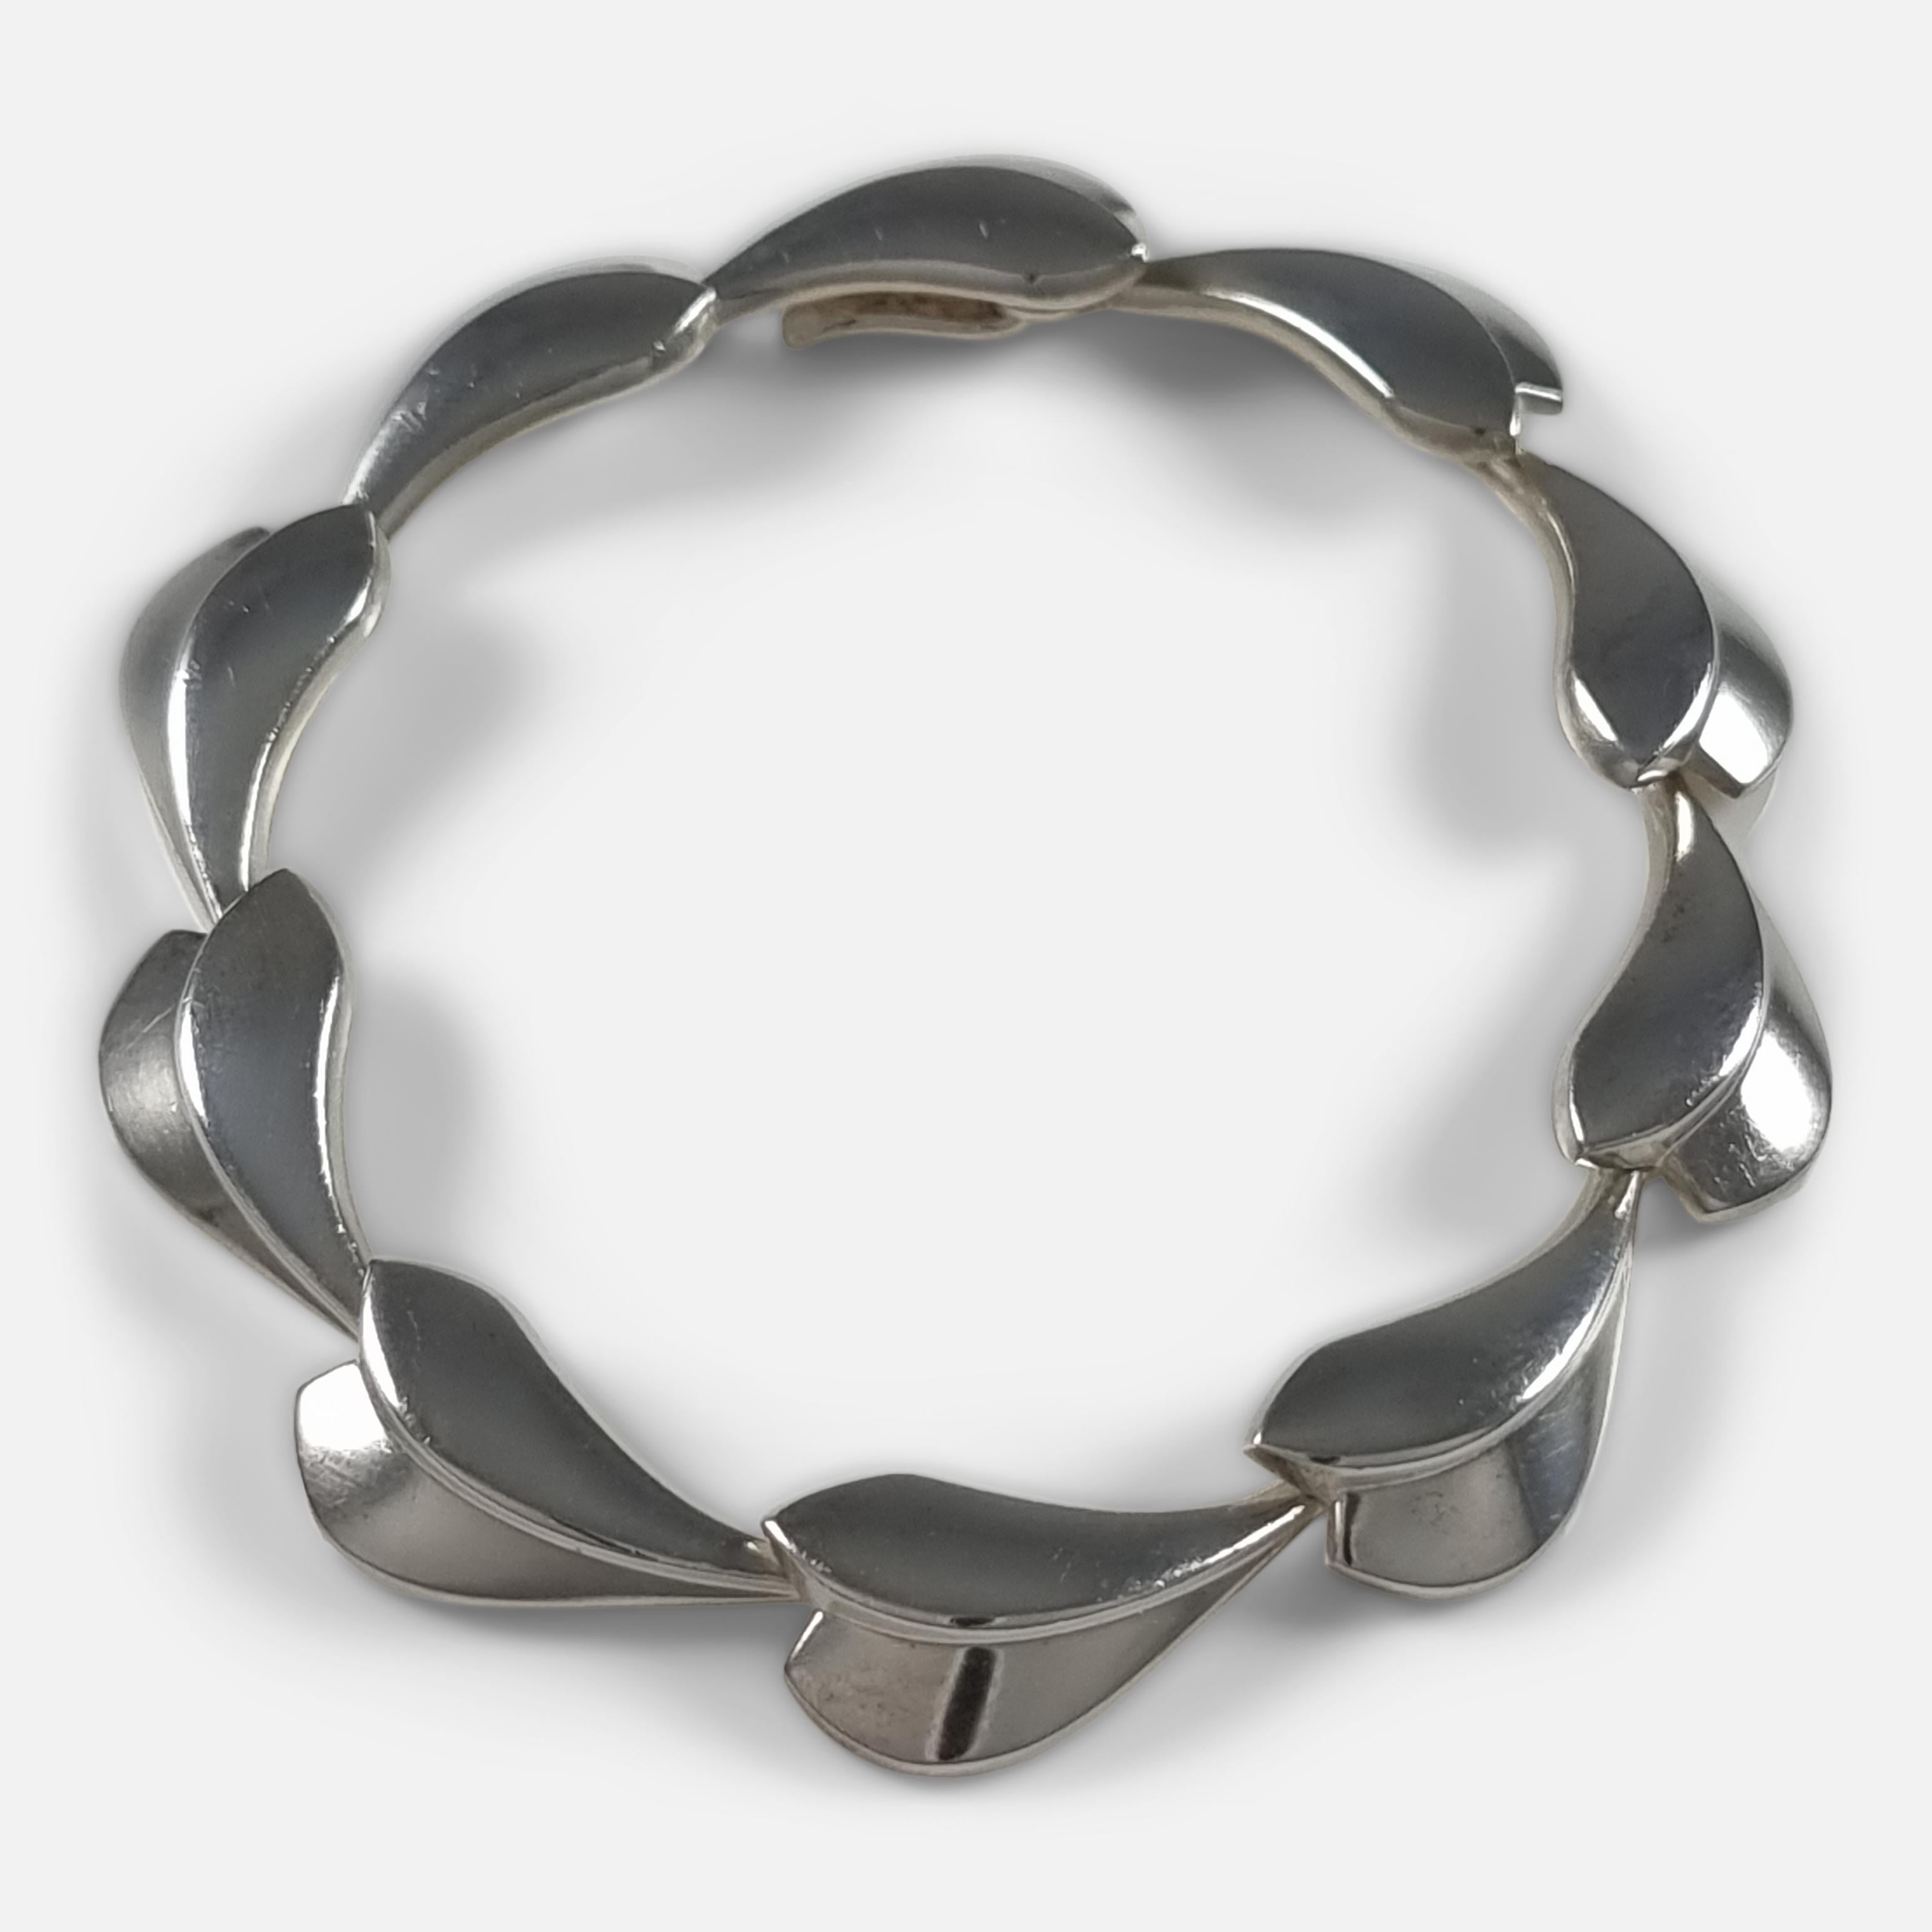 A sterling silver 'Lotus' Bracelet, designed by Per Hertz for Georg Jensen.

Stamped with post-1945 Georg Jensen marks, '925S Denmark', and with Danish Common Control Marks for sterling silver.

Period: - Early 21st century.

Engraving: -